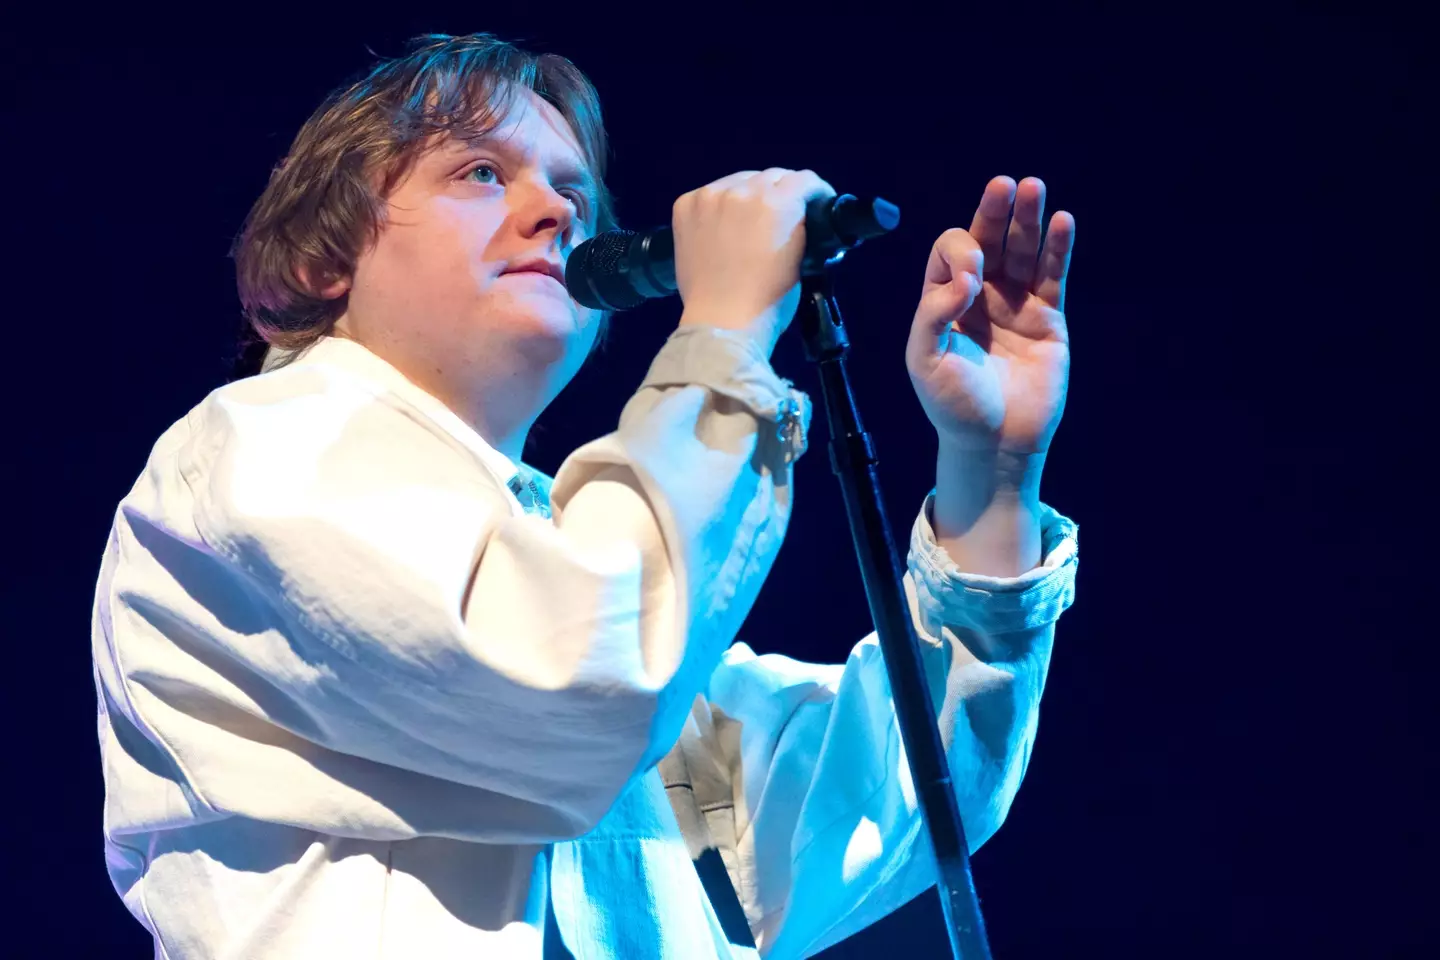 Lewis Capaldi has opened up about his mental health.